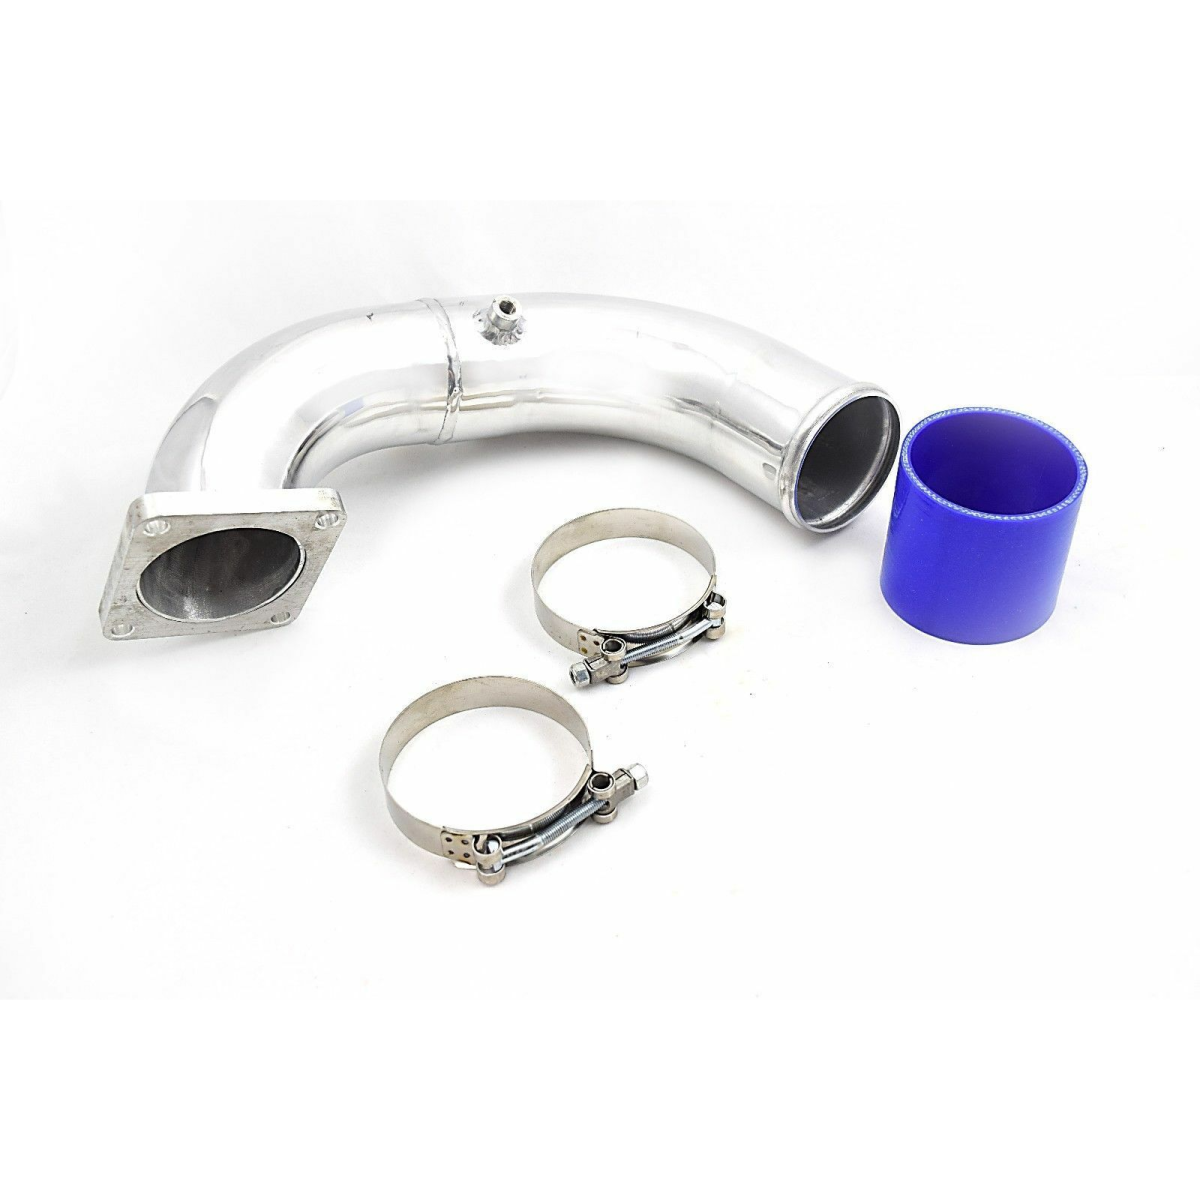 Rudy's Performance Parts - Rudy's 3" Polished Intake Elbow For 94-98 5.9 Cummins